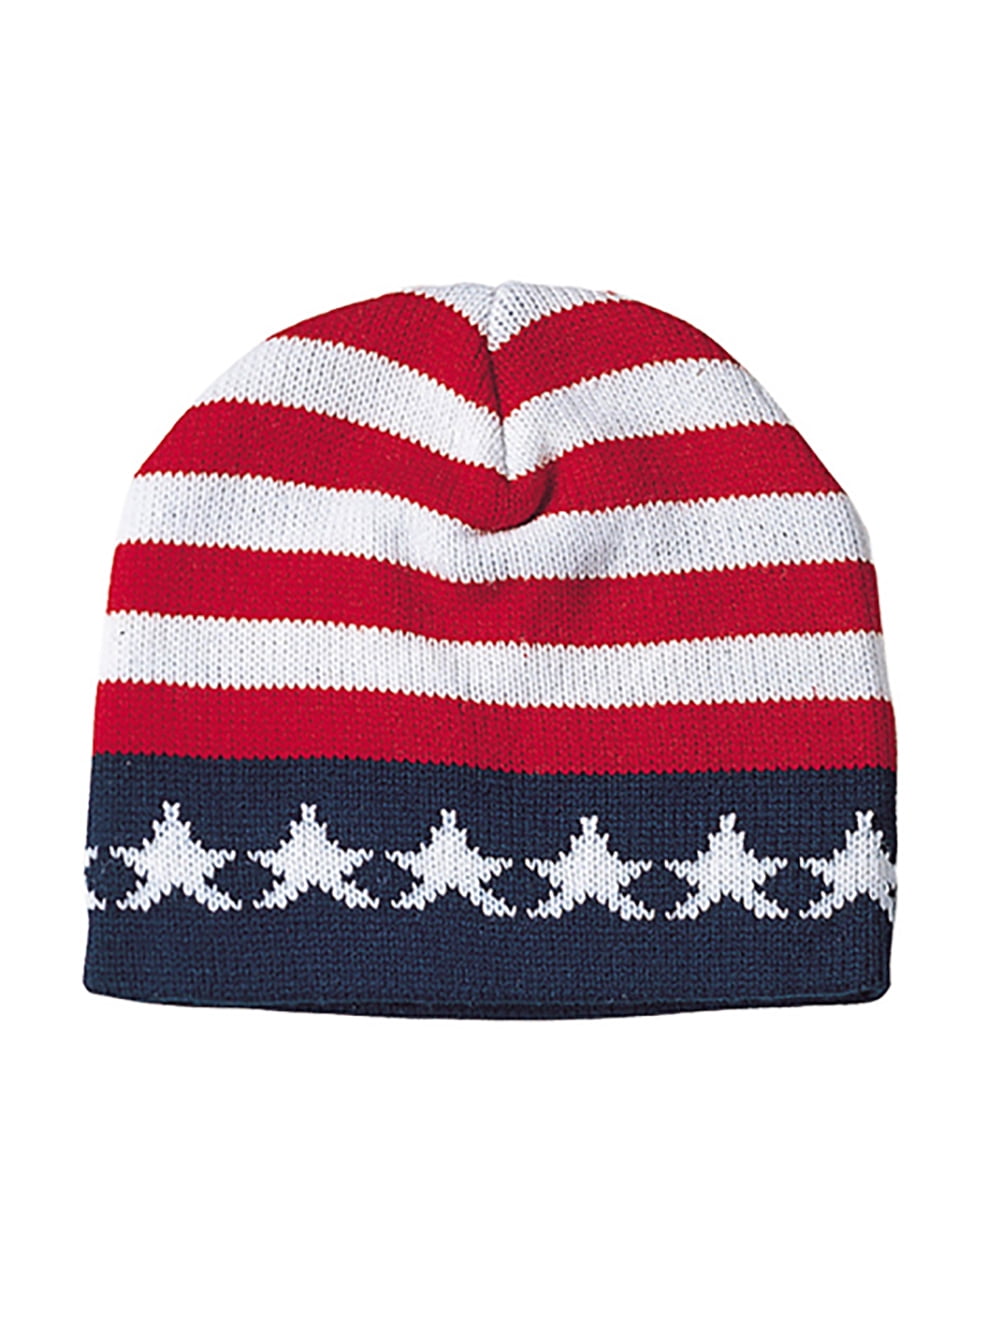 COLLJL-8 Unisex American Veterans Day New Mexico Flag Outdoor Stretch Knit Beanies Hat Soft Winter Knit Caps